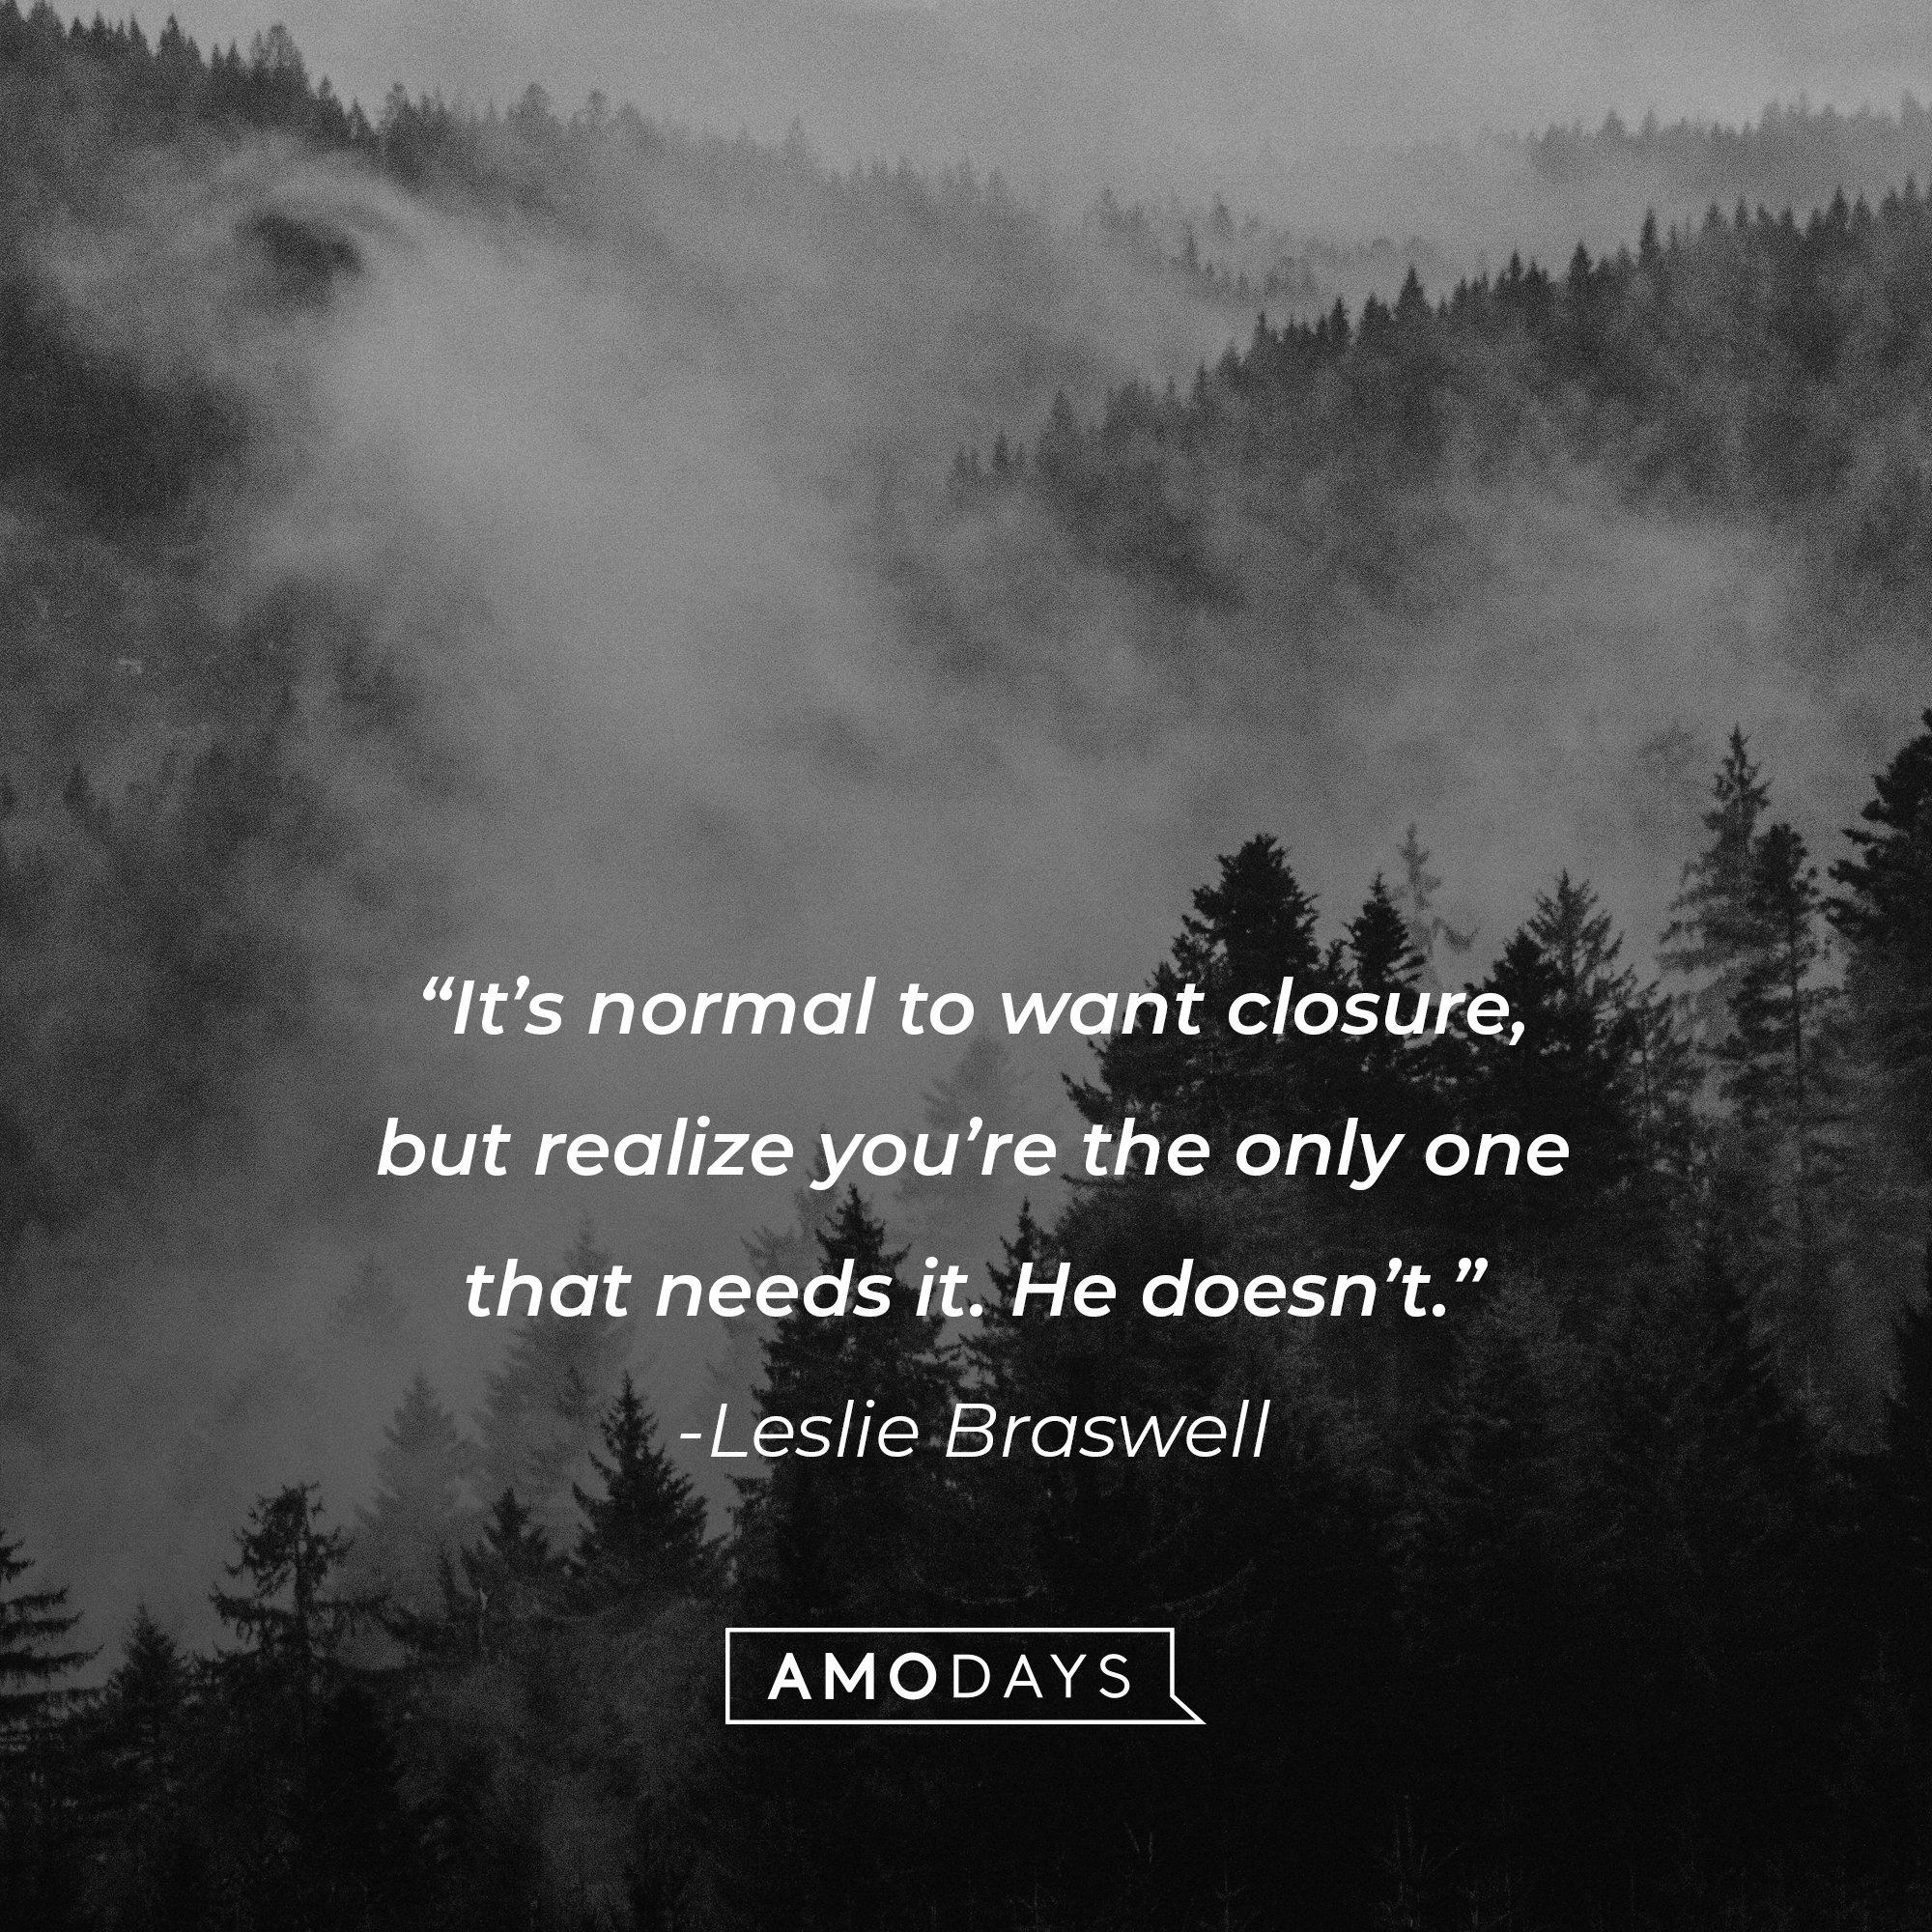 Leslie Braswell's quote: "It's normal to want closure, but realize you’re the only one that needs it. He doesn't." | Image: AmoDays